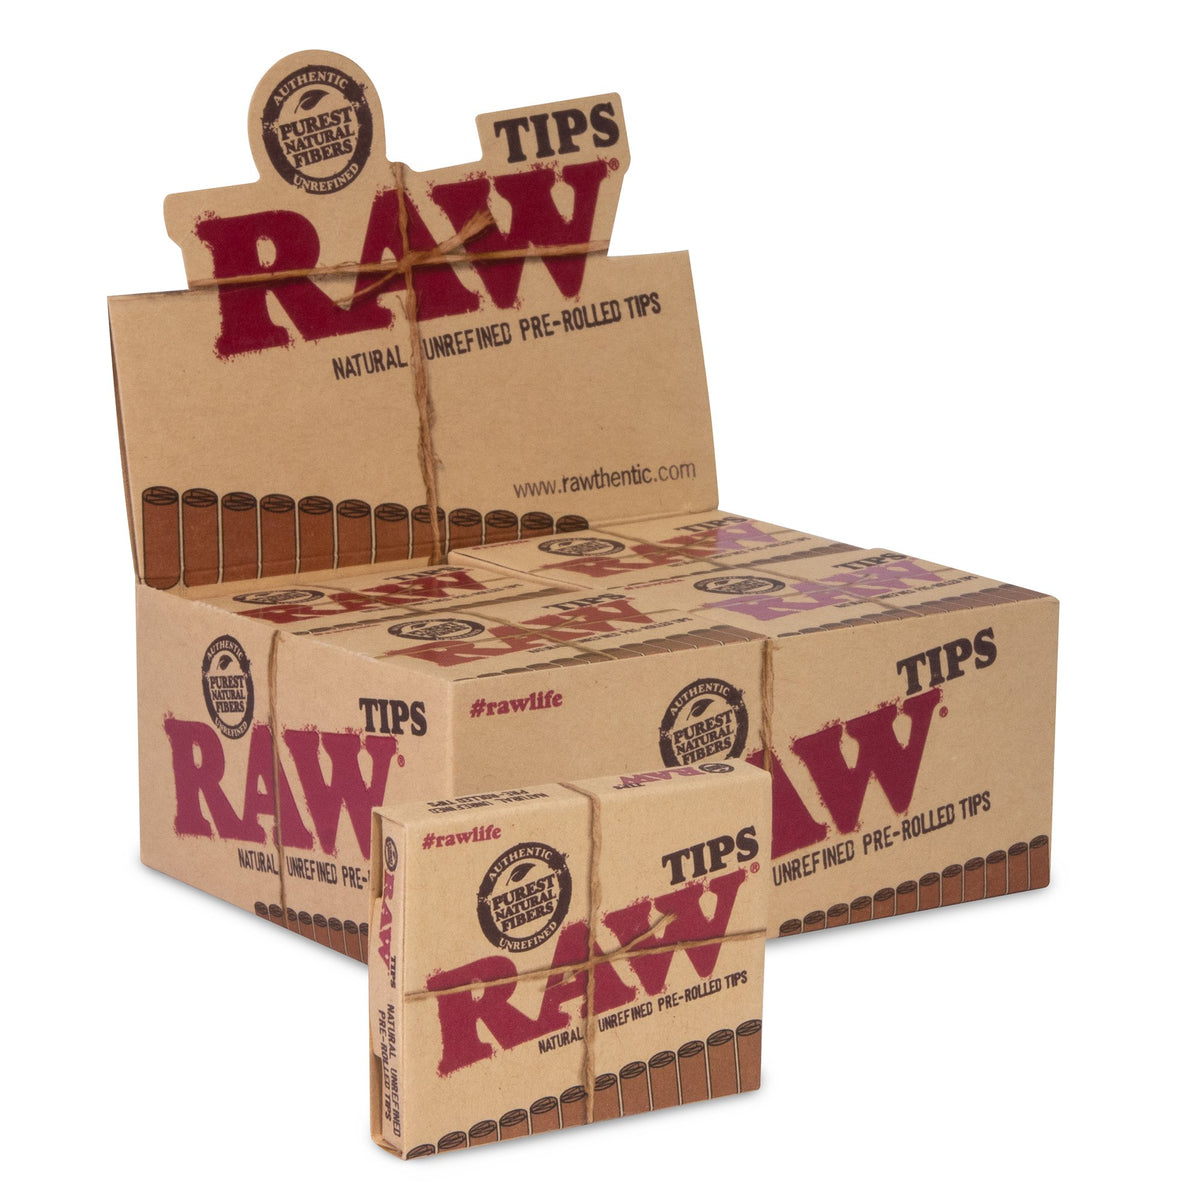 RAW Pre-Rolled Tips Rolling Tips WAR00276-MUSA01 esd-official